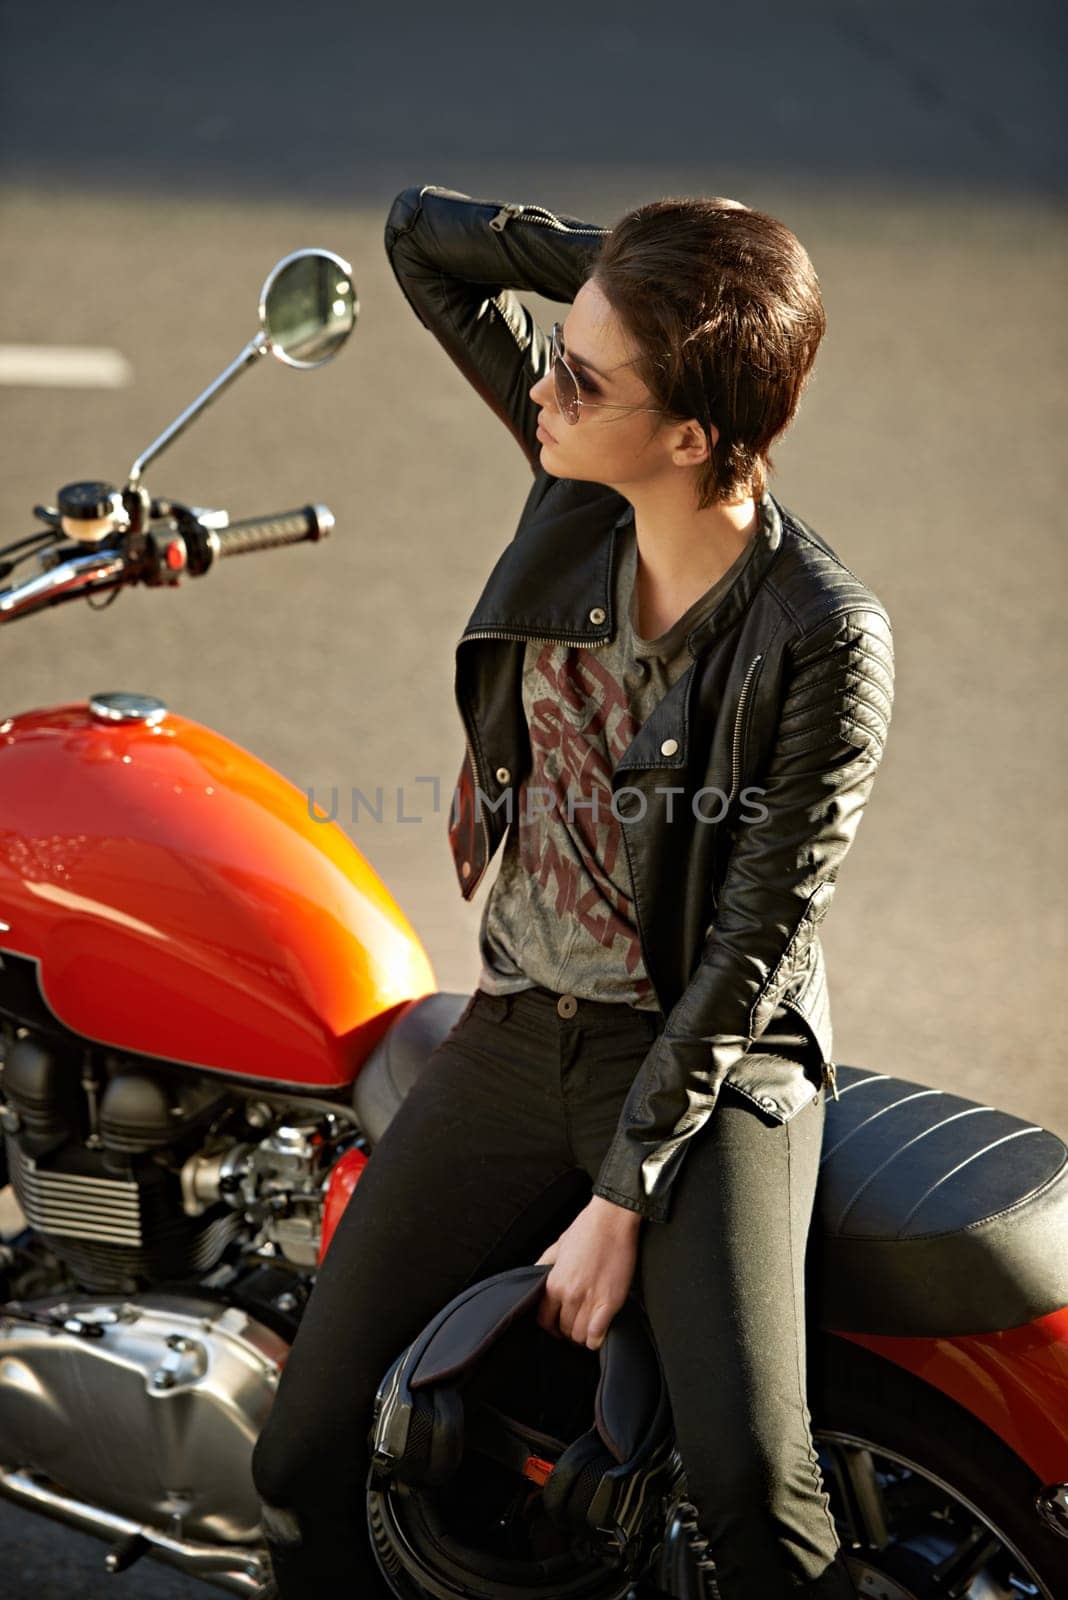 Motorcycle, street and woman in city with sunglasses for travel, transport or road trip as rebel. Fashion, leather and model with attitude on classic or vintage bike for transportation or journey.